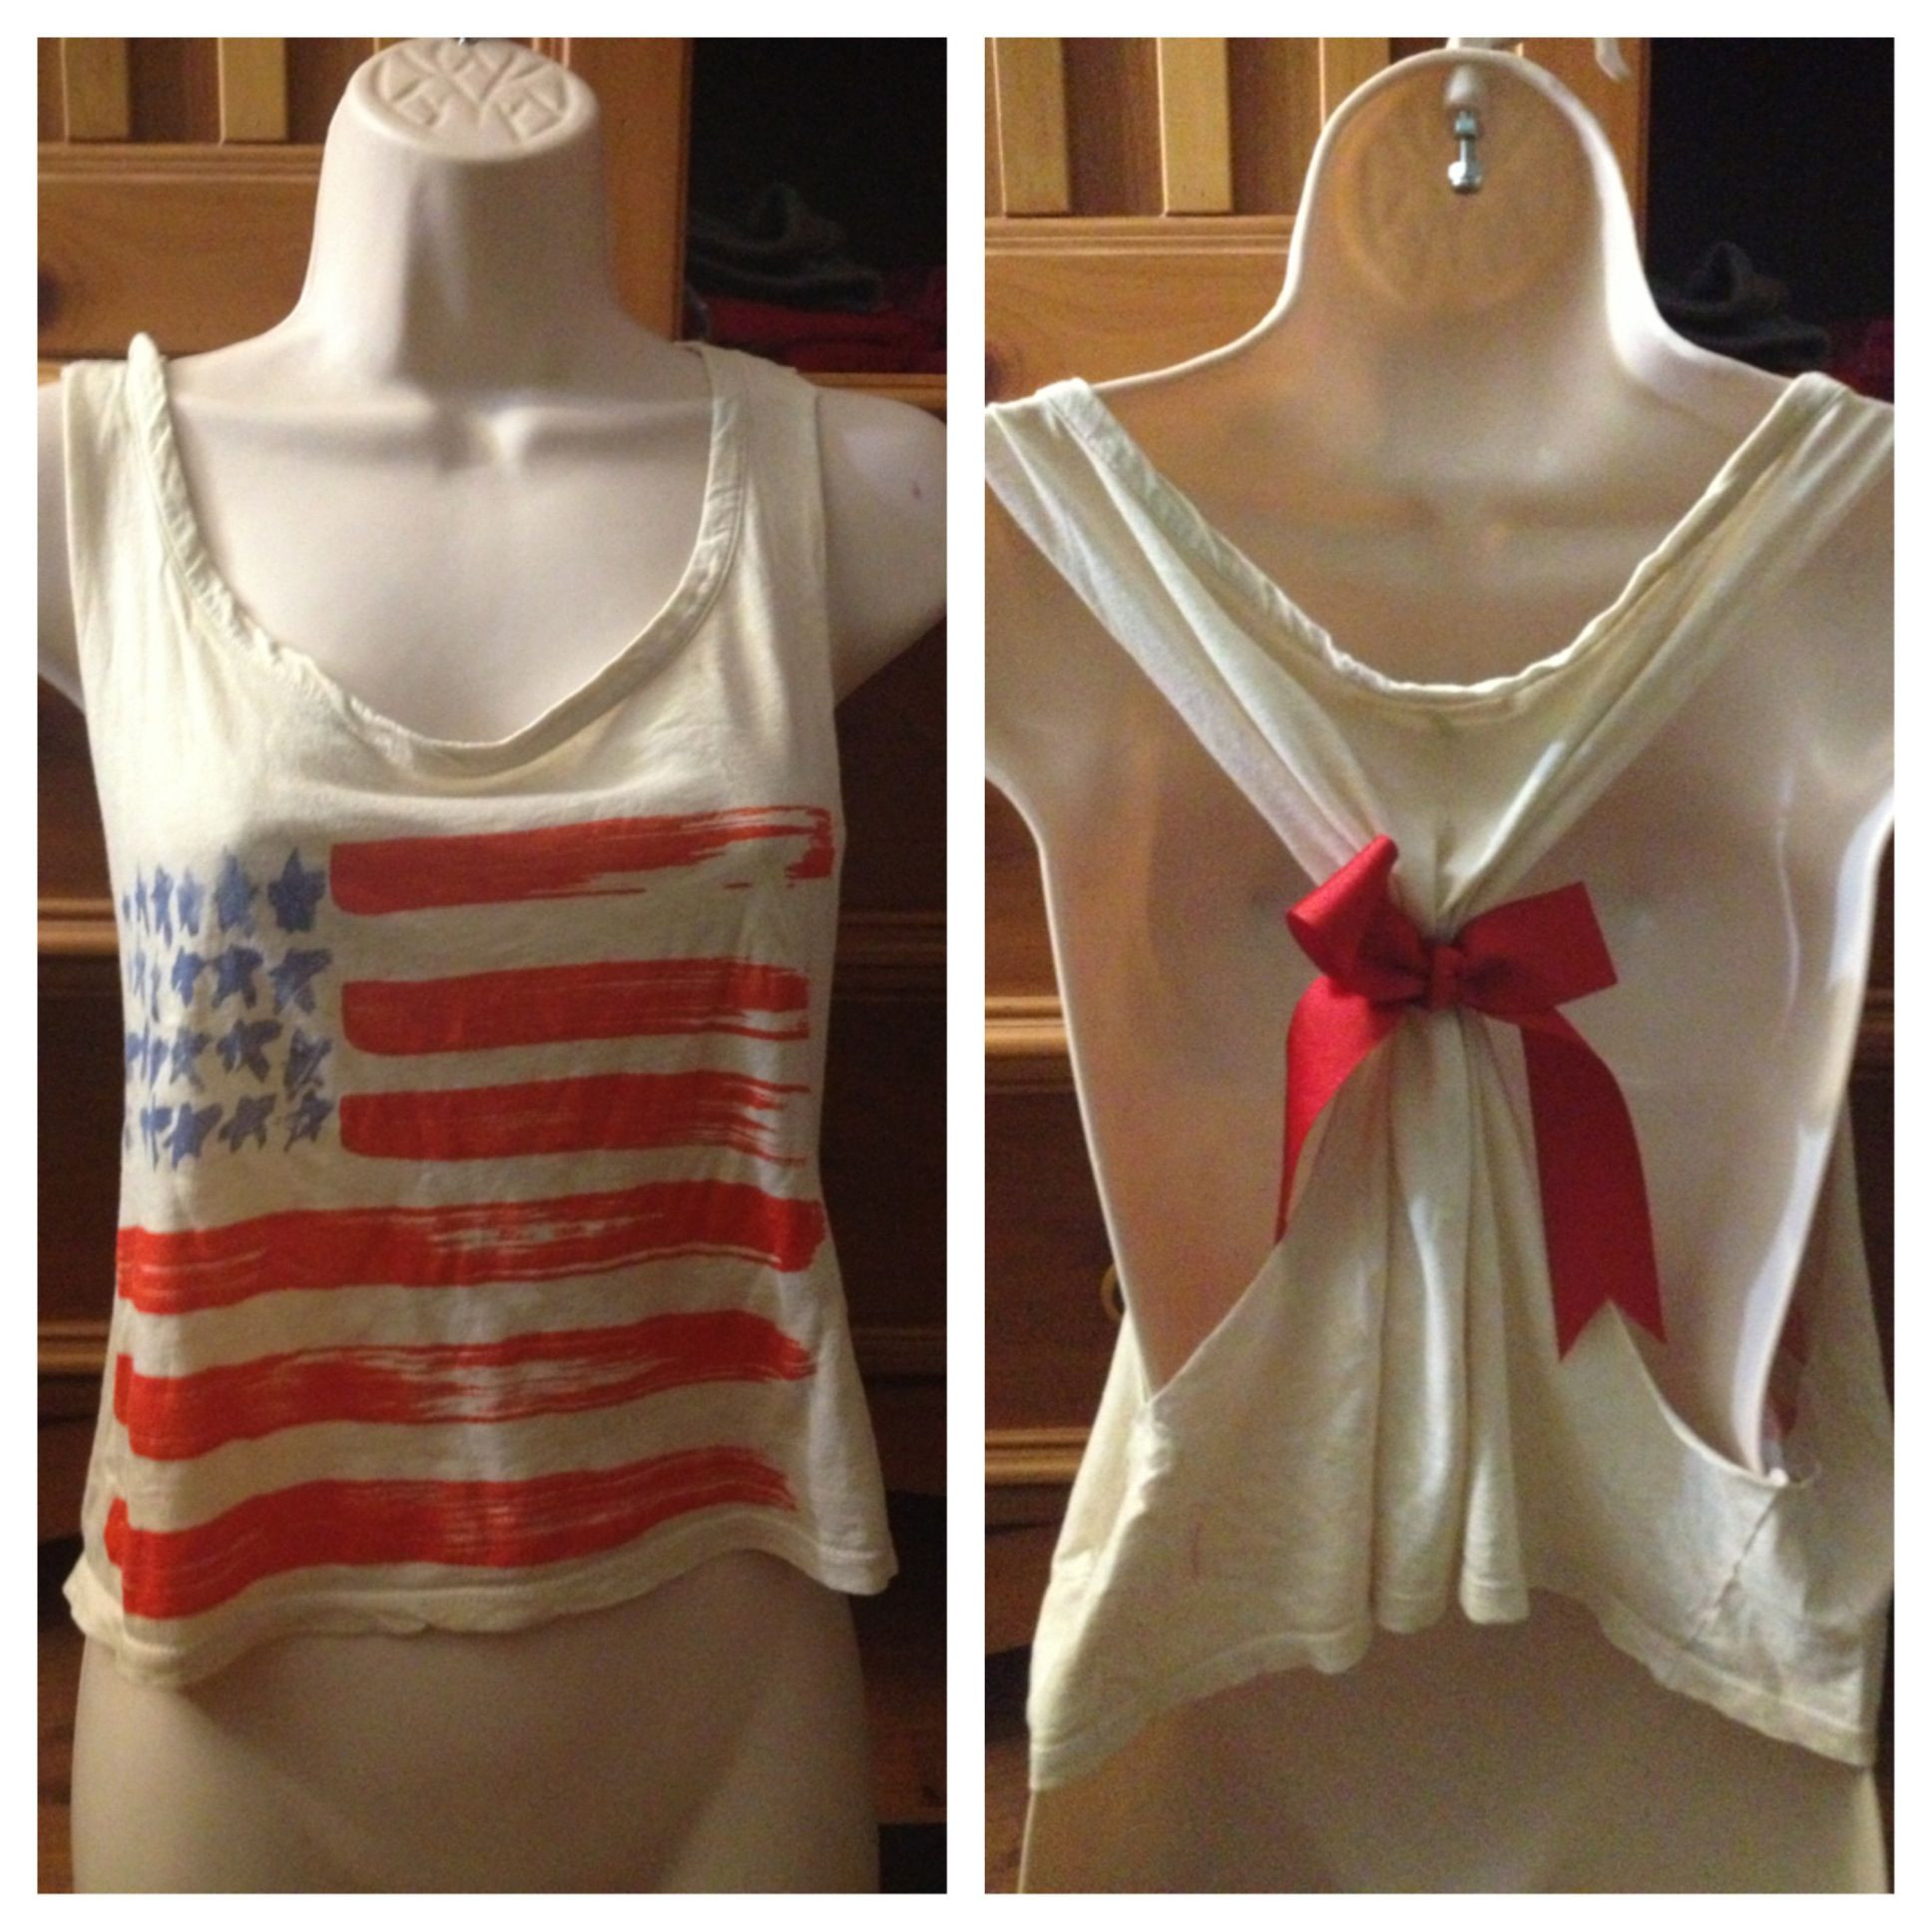 Diy 4th Of July Outfits
 Homemade Fourth of July tank top DIY outfit I love it